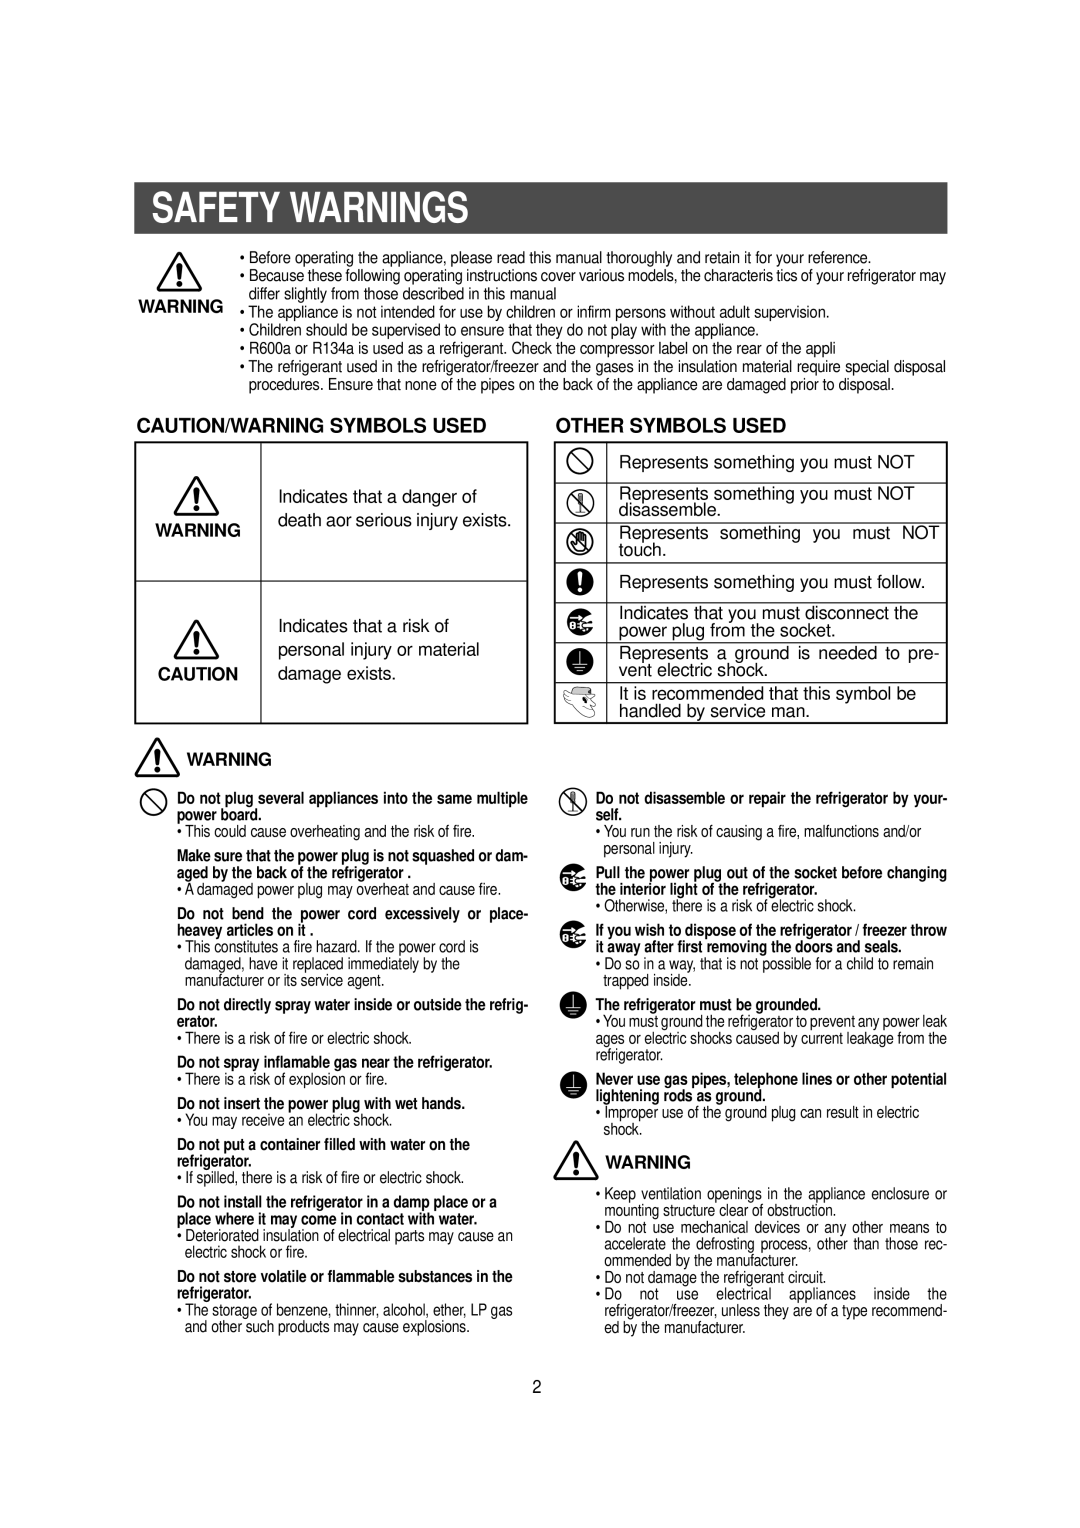 Samsung RS owner manual Safety Warnings, Caution/Warning Symbols Used, Other Symbols Used 